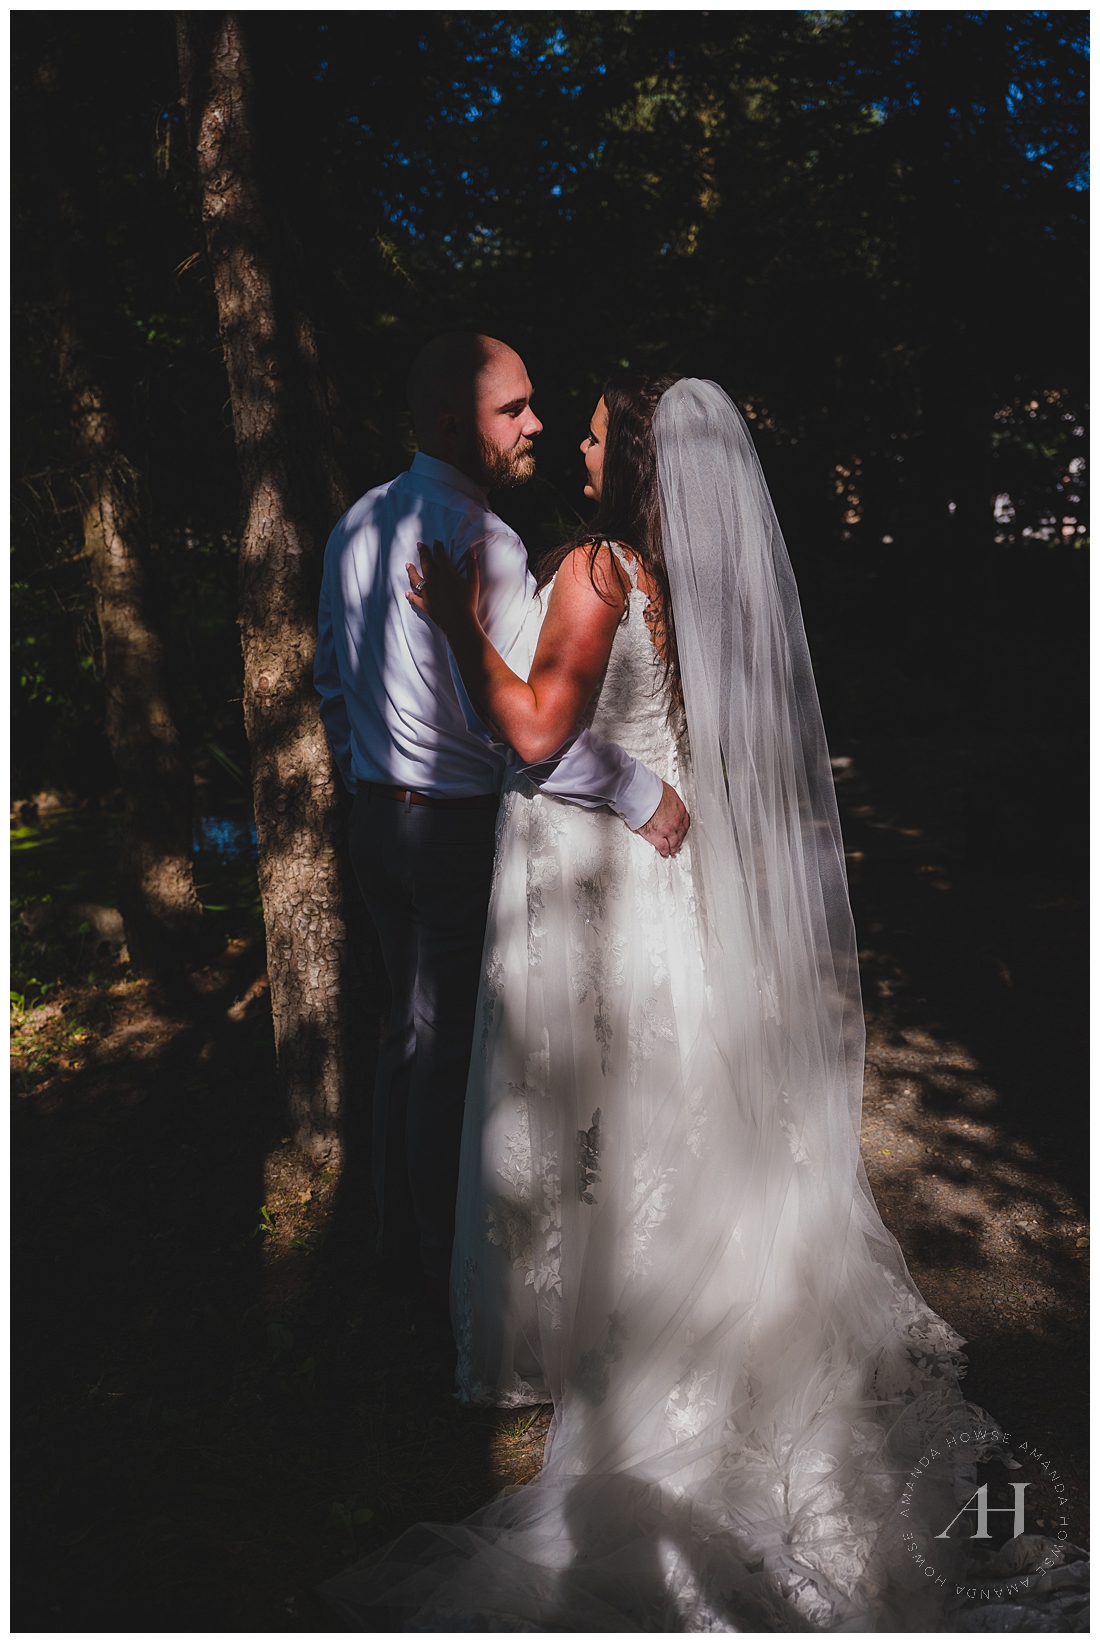 PNW Bride and Groom Portraits in Woodland Meadows | Photographed by the Best Tacoma Wedding Photographer Amanda Howse Photography